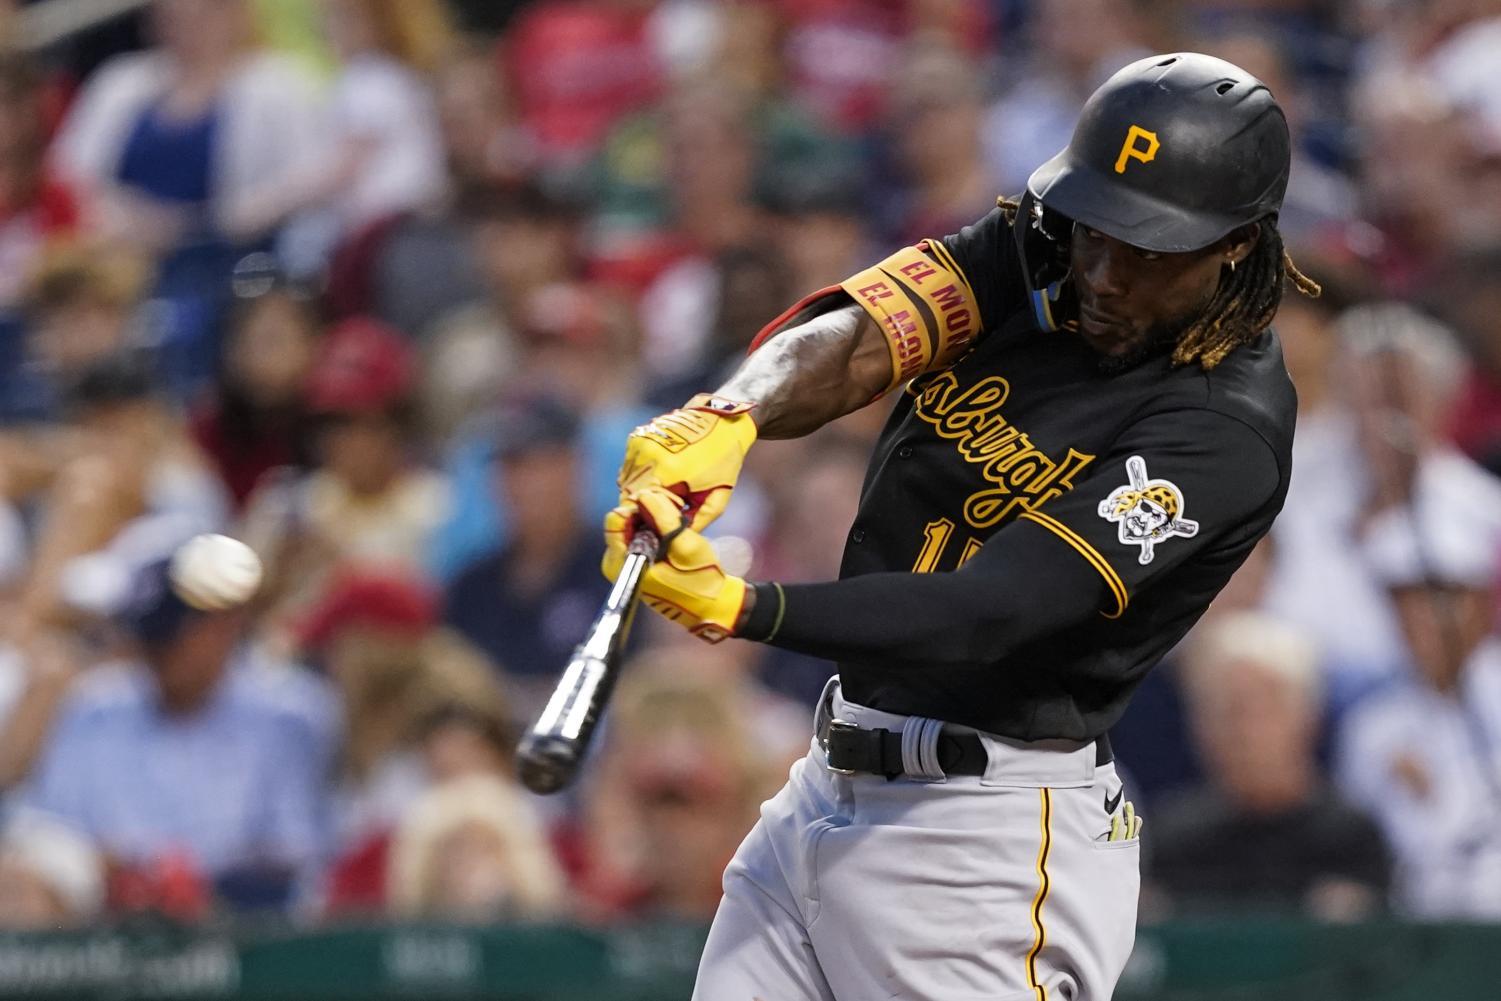 After playing waiting game, Pirates No. 1 prospect Oneil Cruz